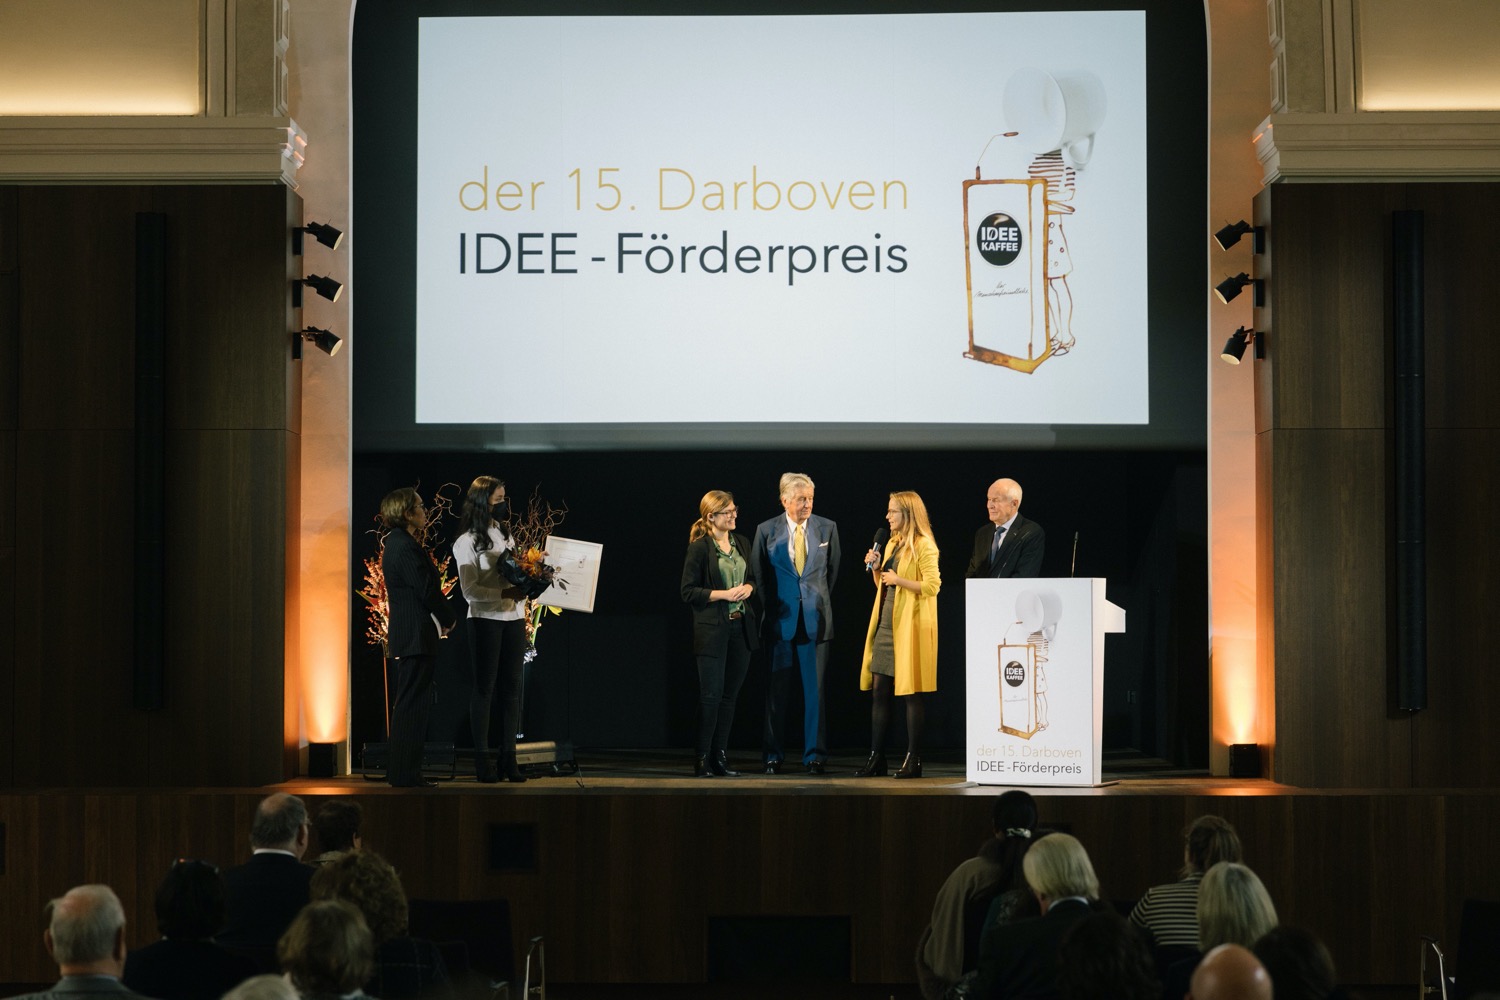 Award ceremony for the 15th Darboven IDEE Sponsorship Prize in Hamburg - 1st place prize awarded